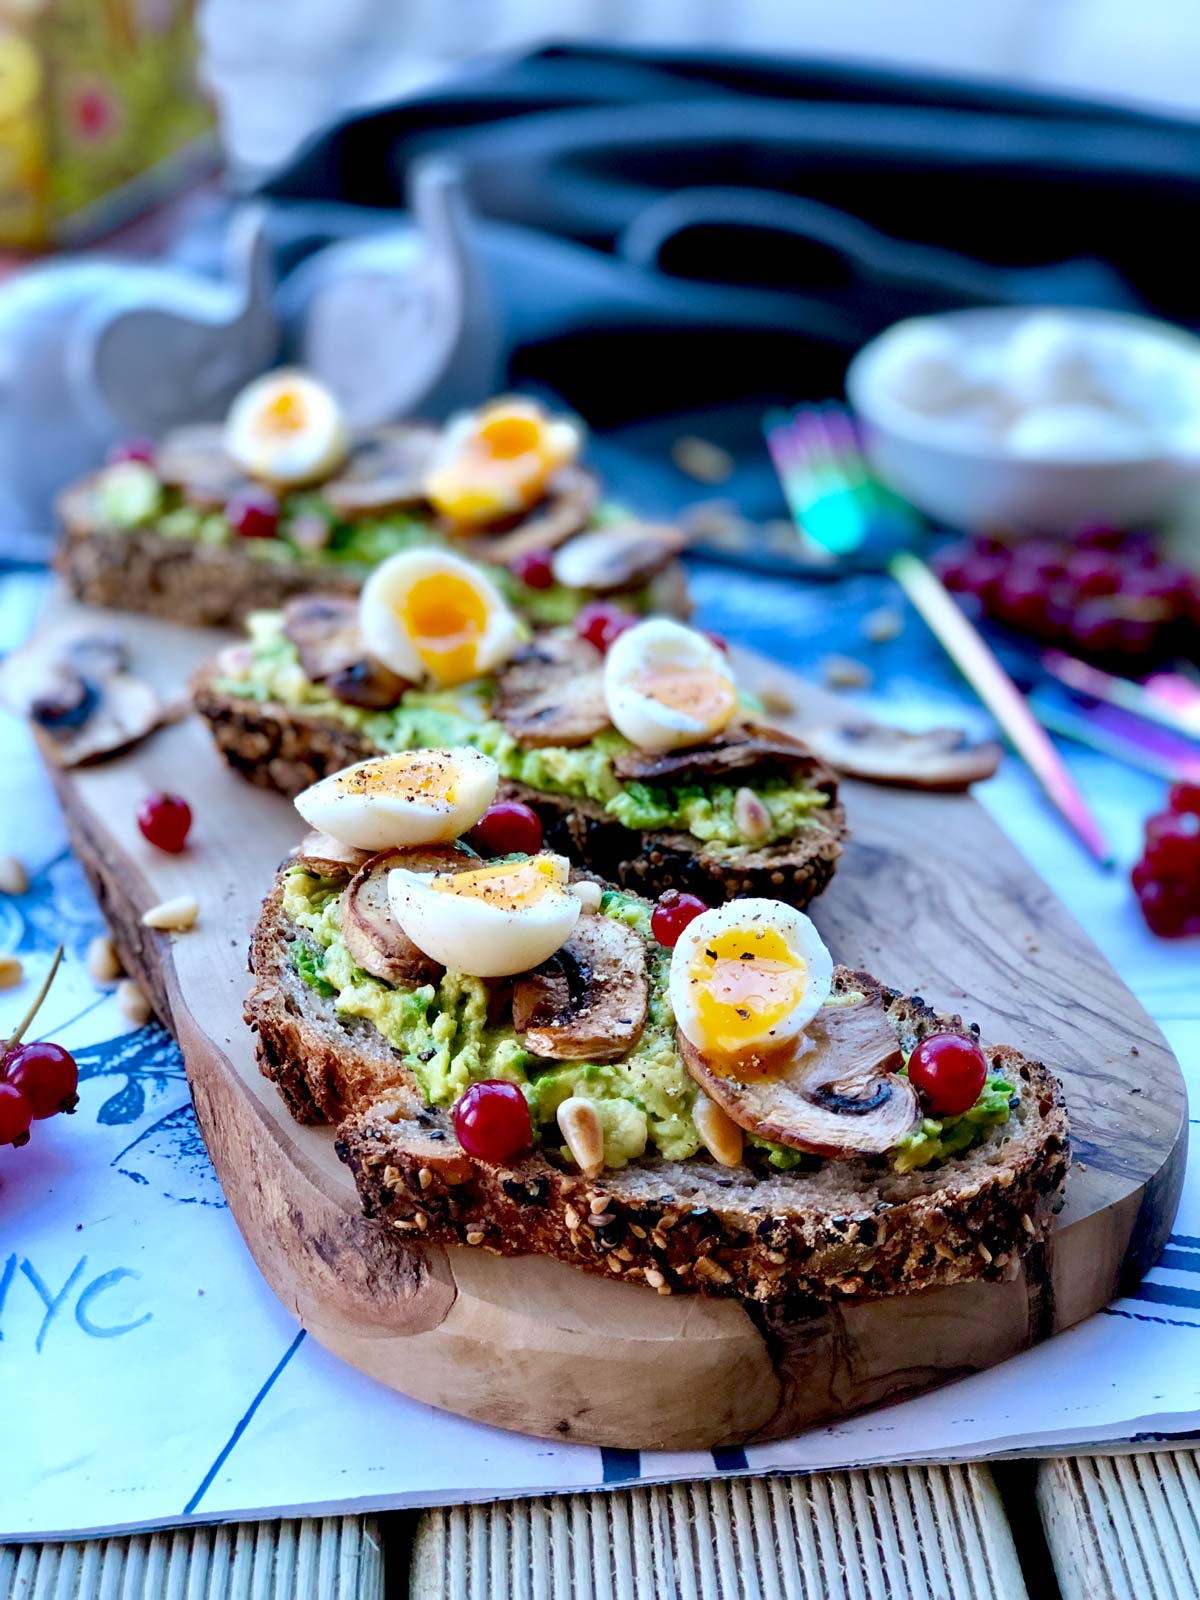 Soft boiled quail eggs, crushed avocado and red currants on sourdough toast